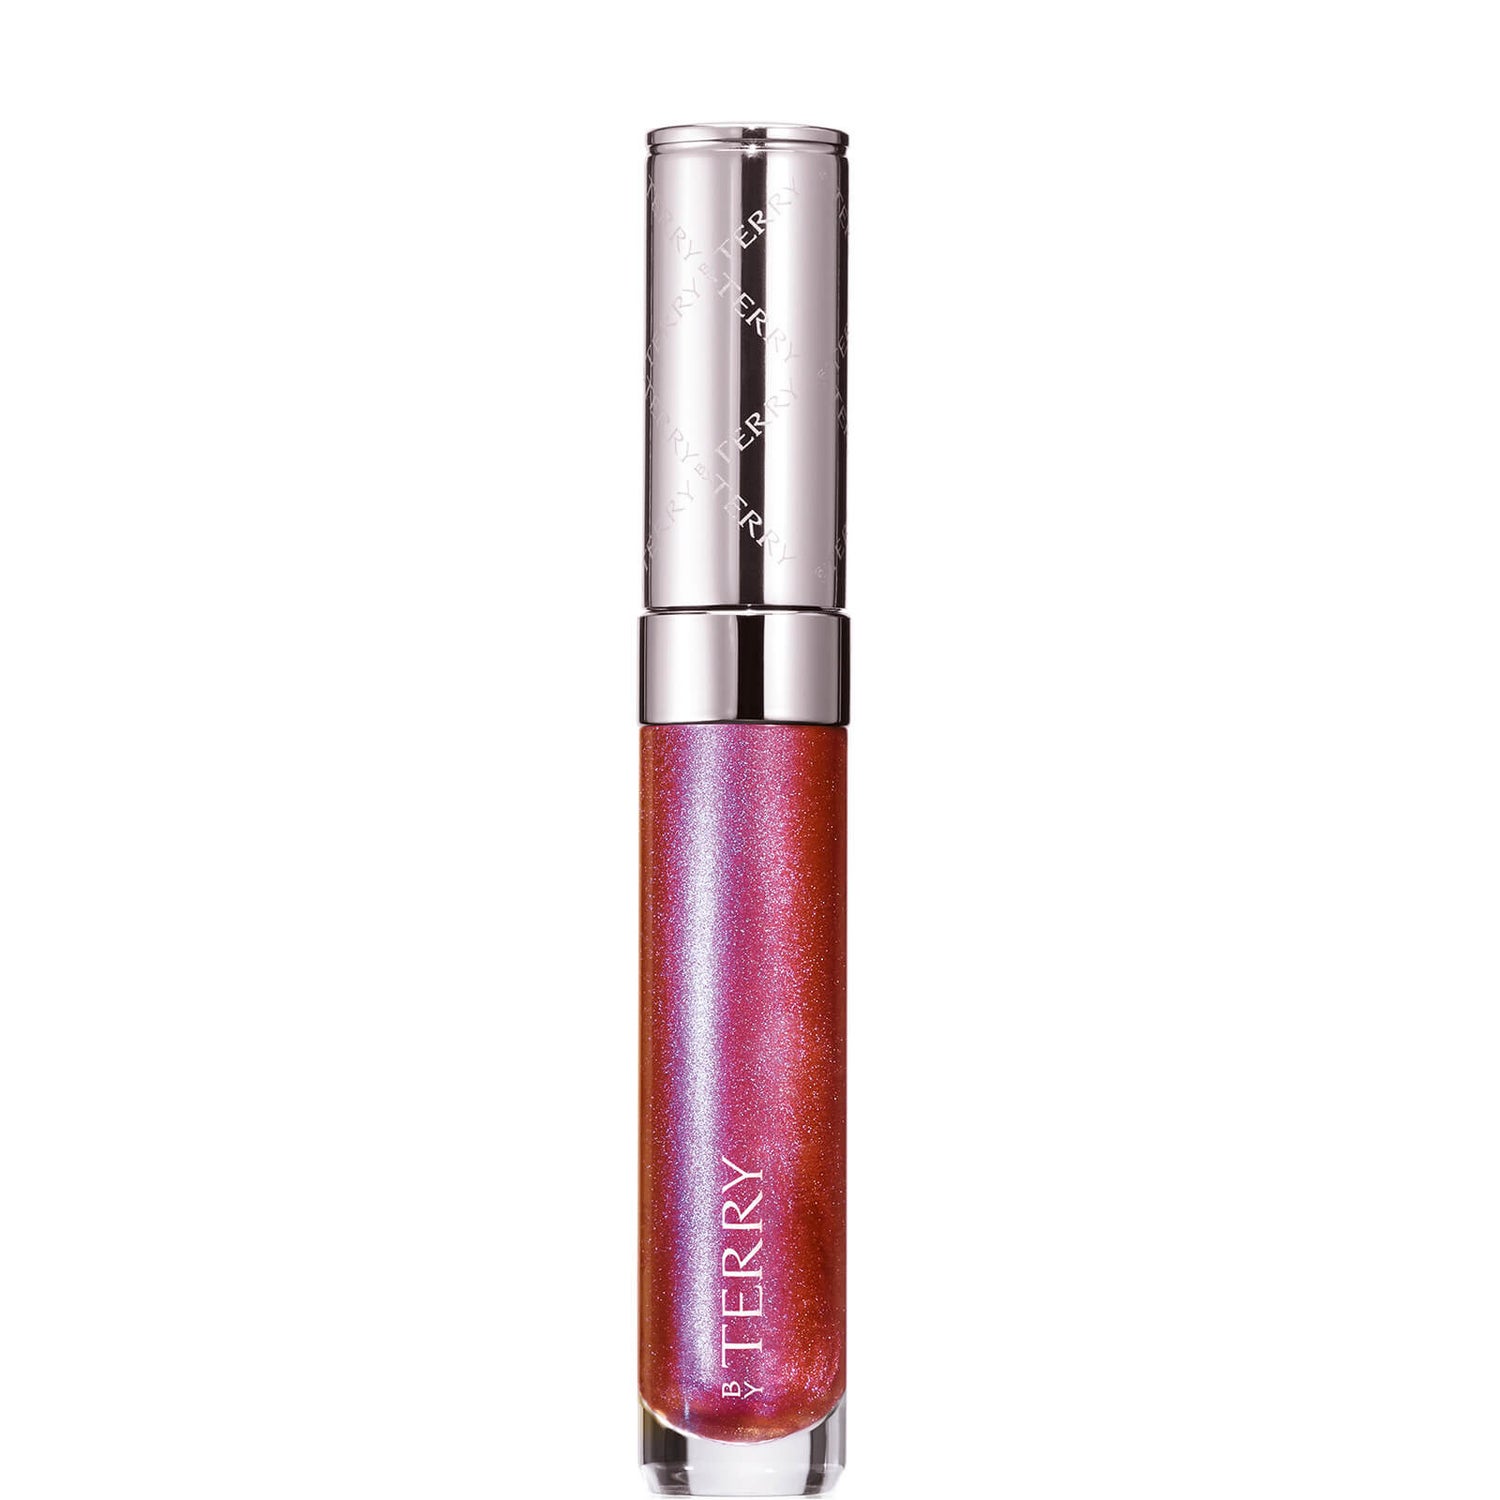 BY TERRY Techno Aura Collection - Gloss Terrybly Shine (Limited Edition)